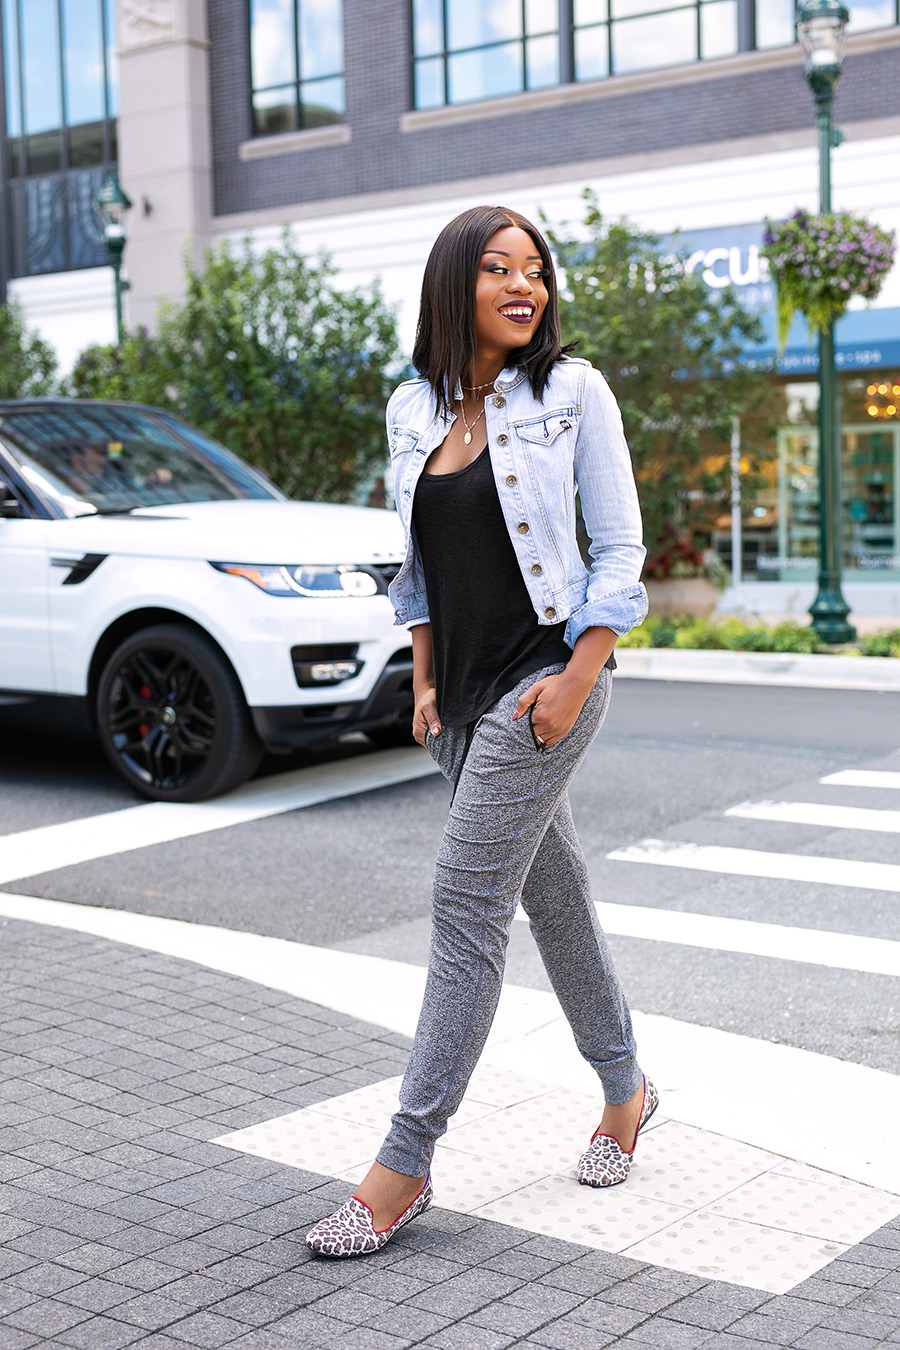 Stella-adewunmi-of-jadore-fashion-shares-casual-comfortable-outfits-rothys-loafers-sweatpants